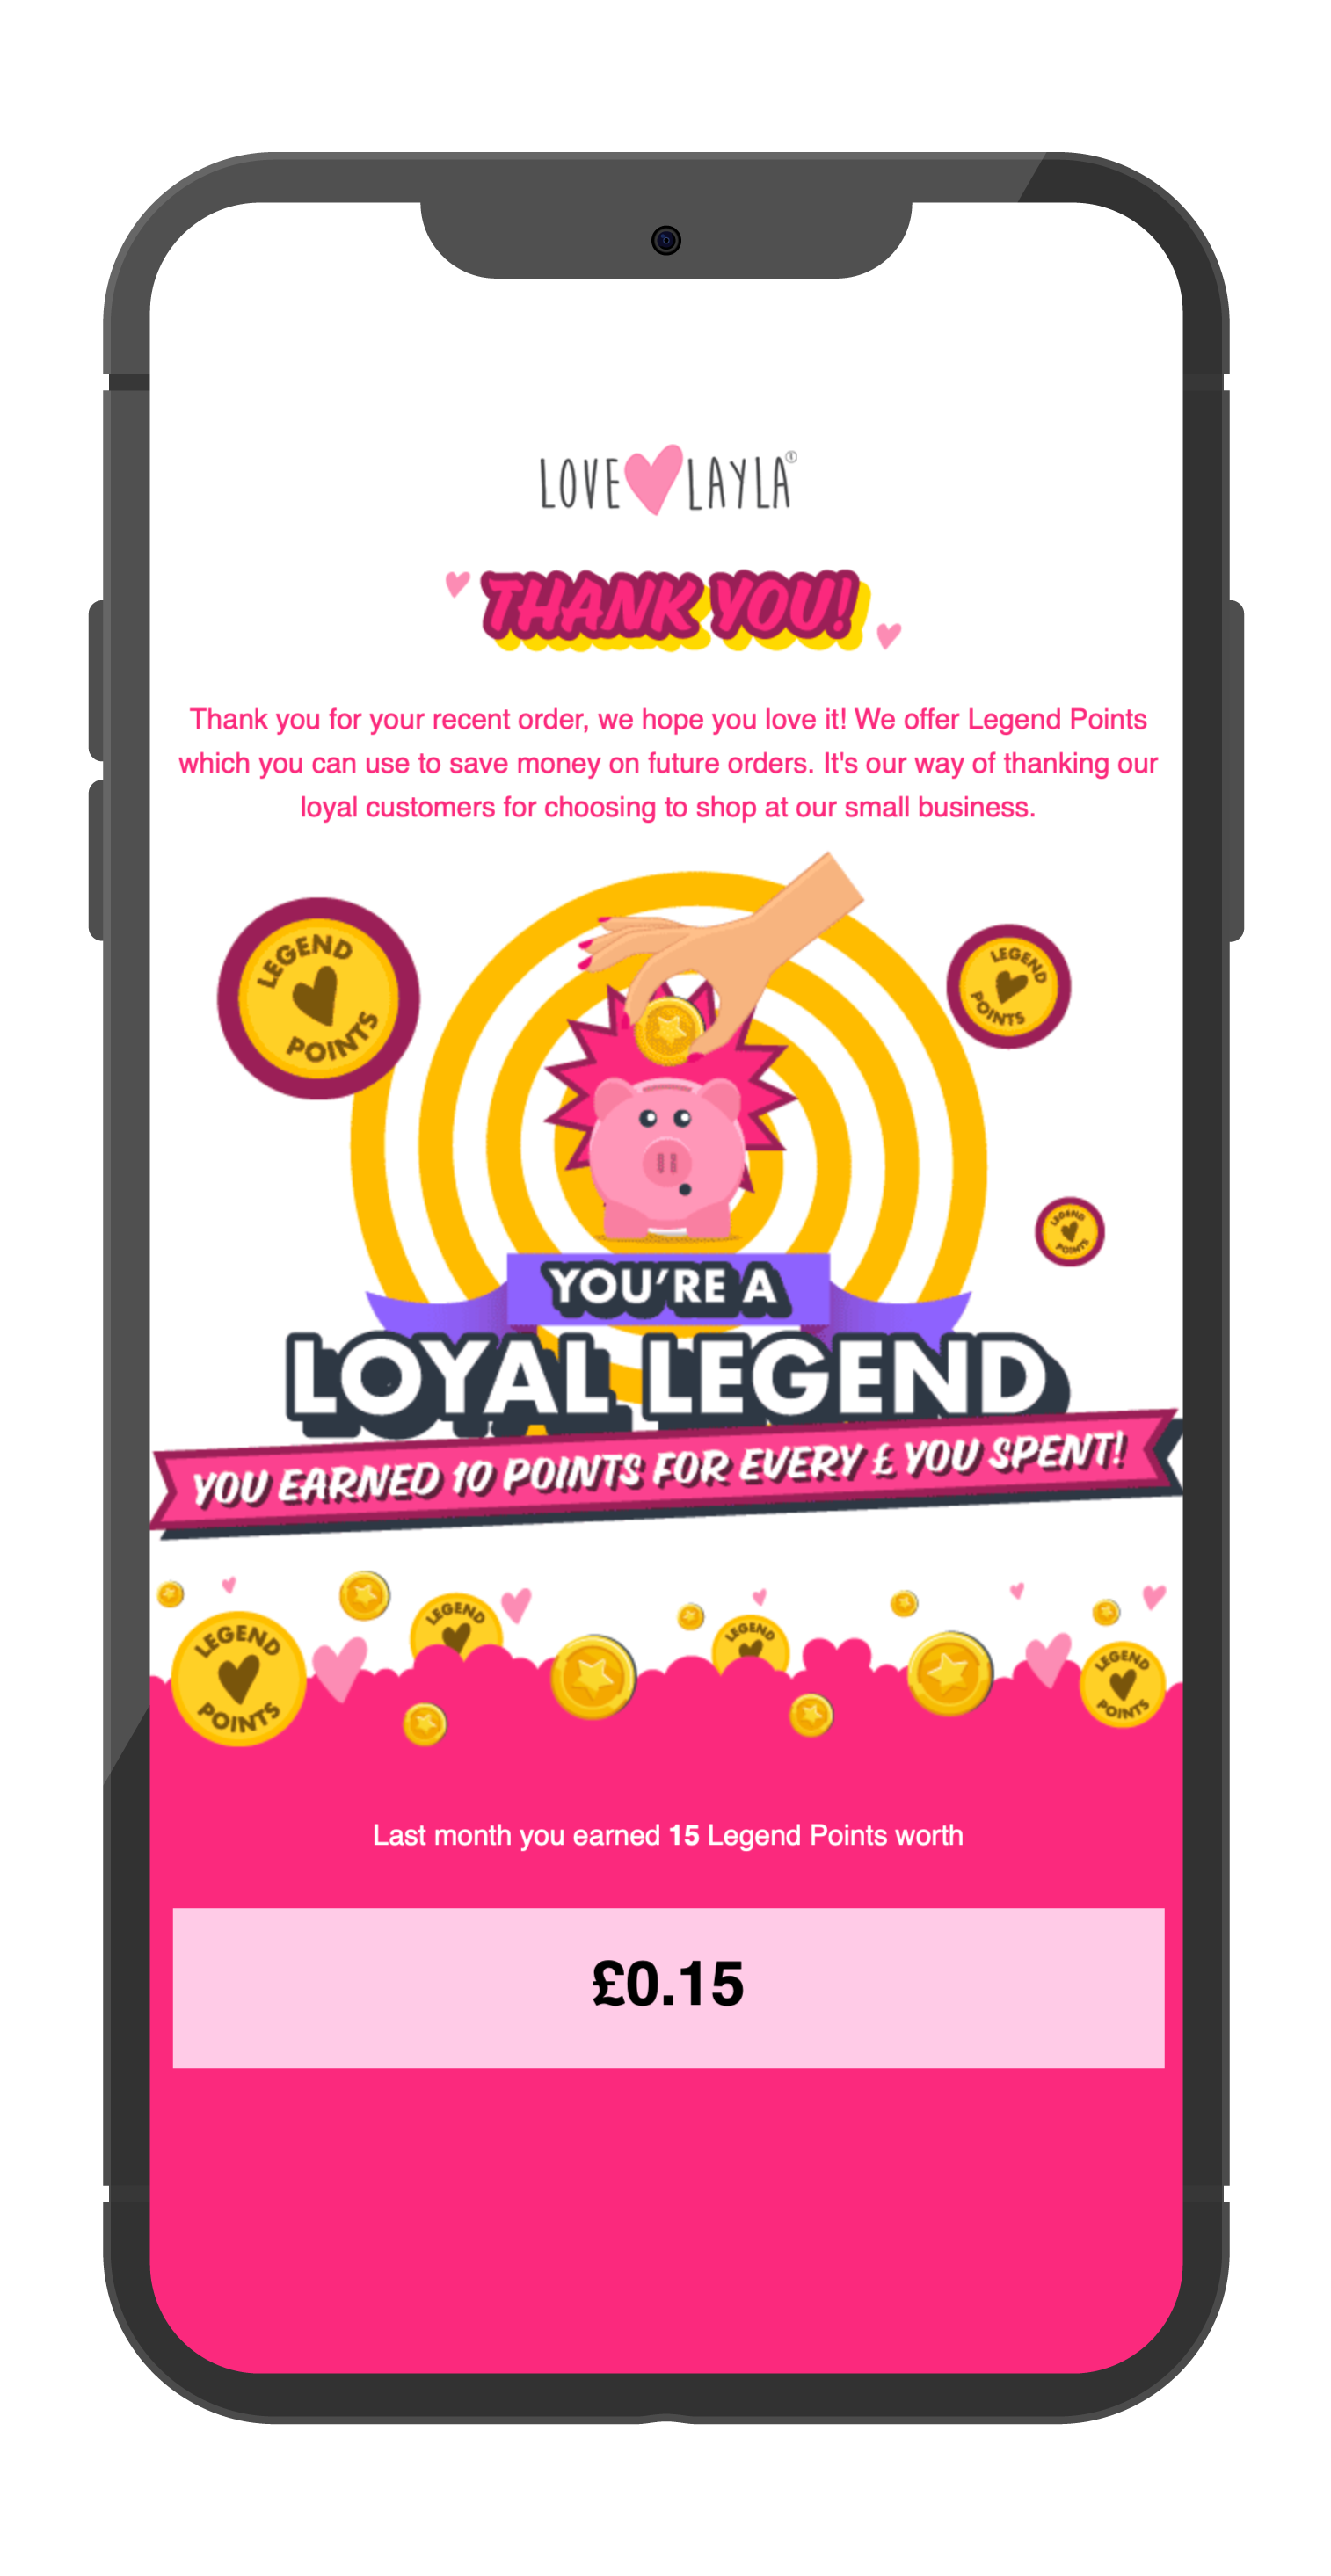 a loyalty email created for e-commerce marketing by our web development team